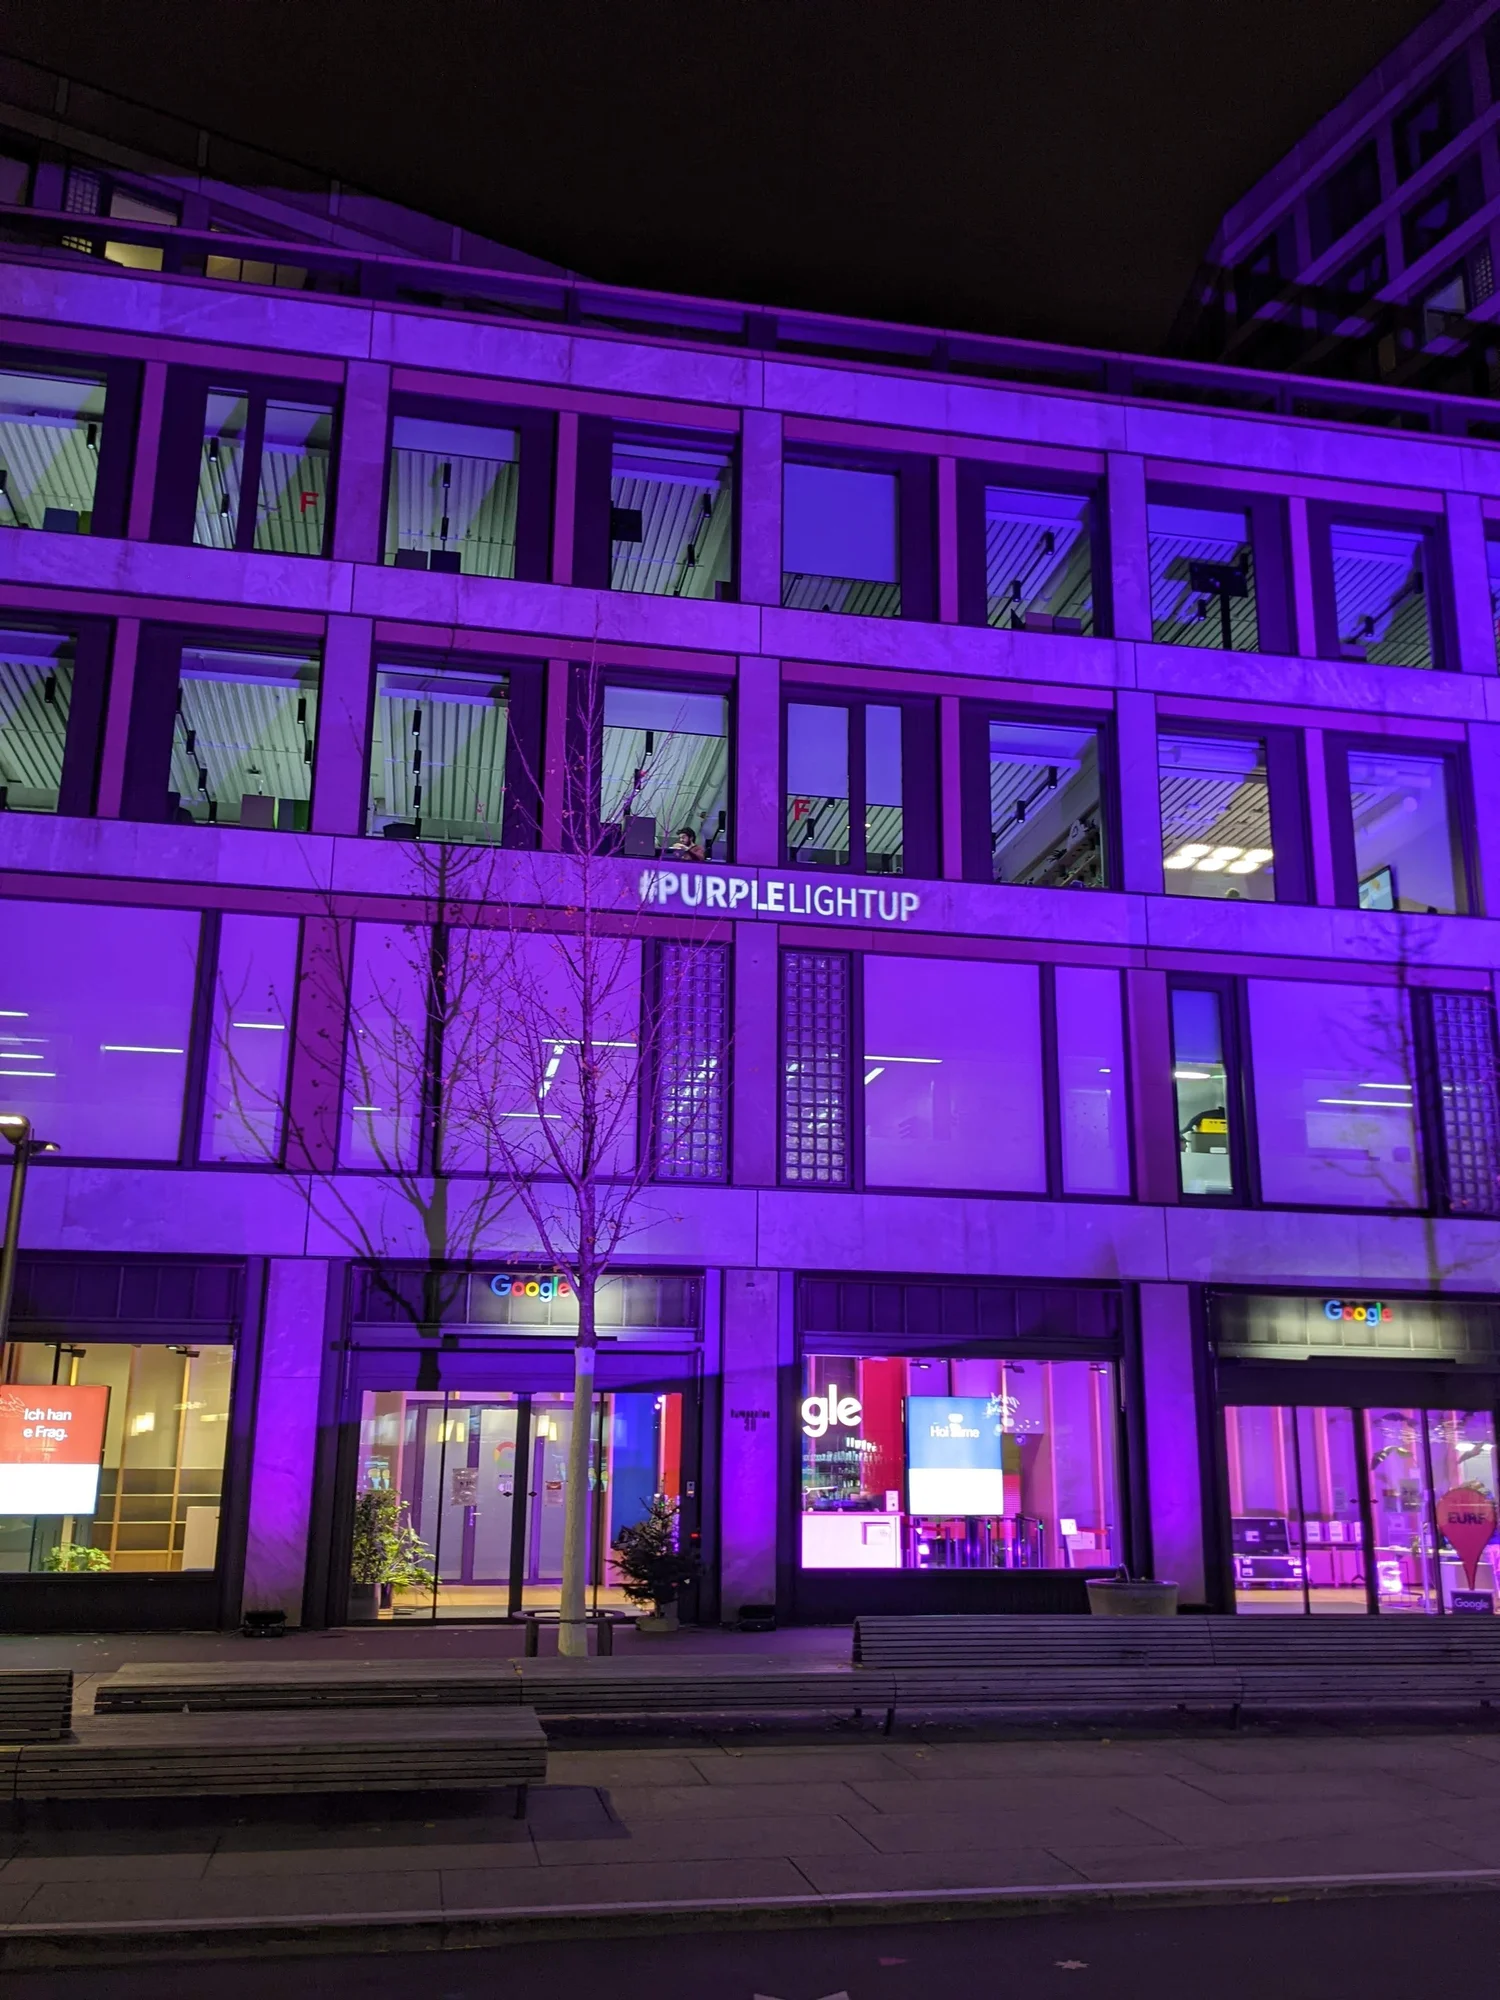 Building front of Google building in Europalle Zurich, highlighted in purple. On second level, white text reads #PurpleLightUp.